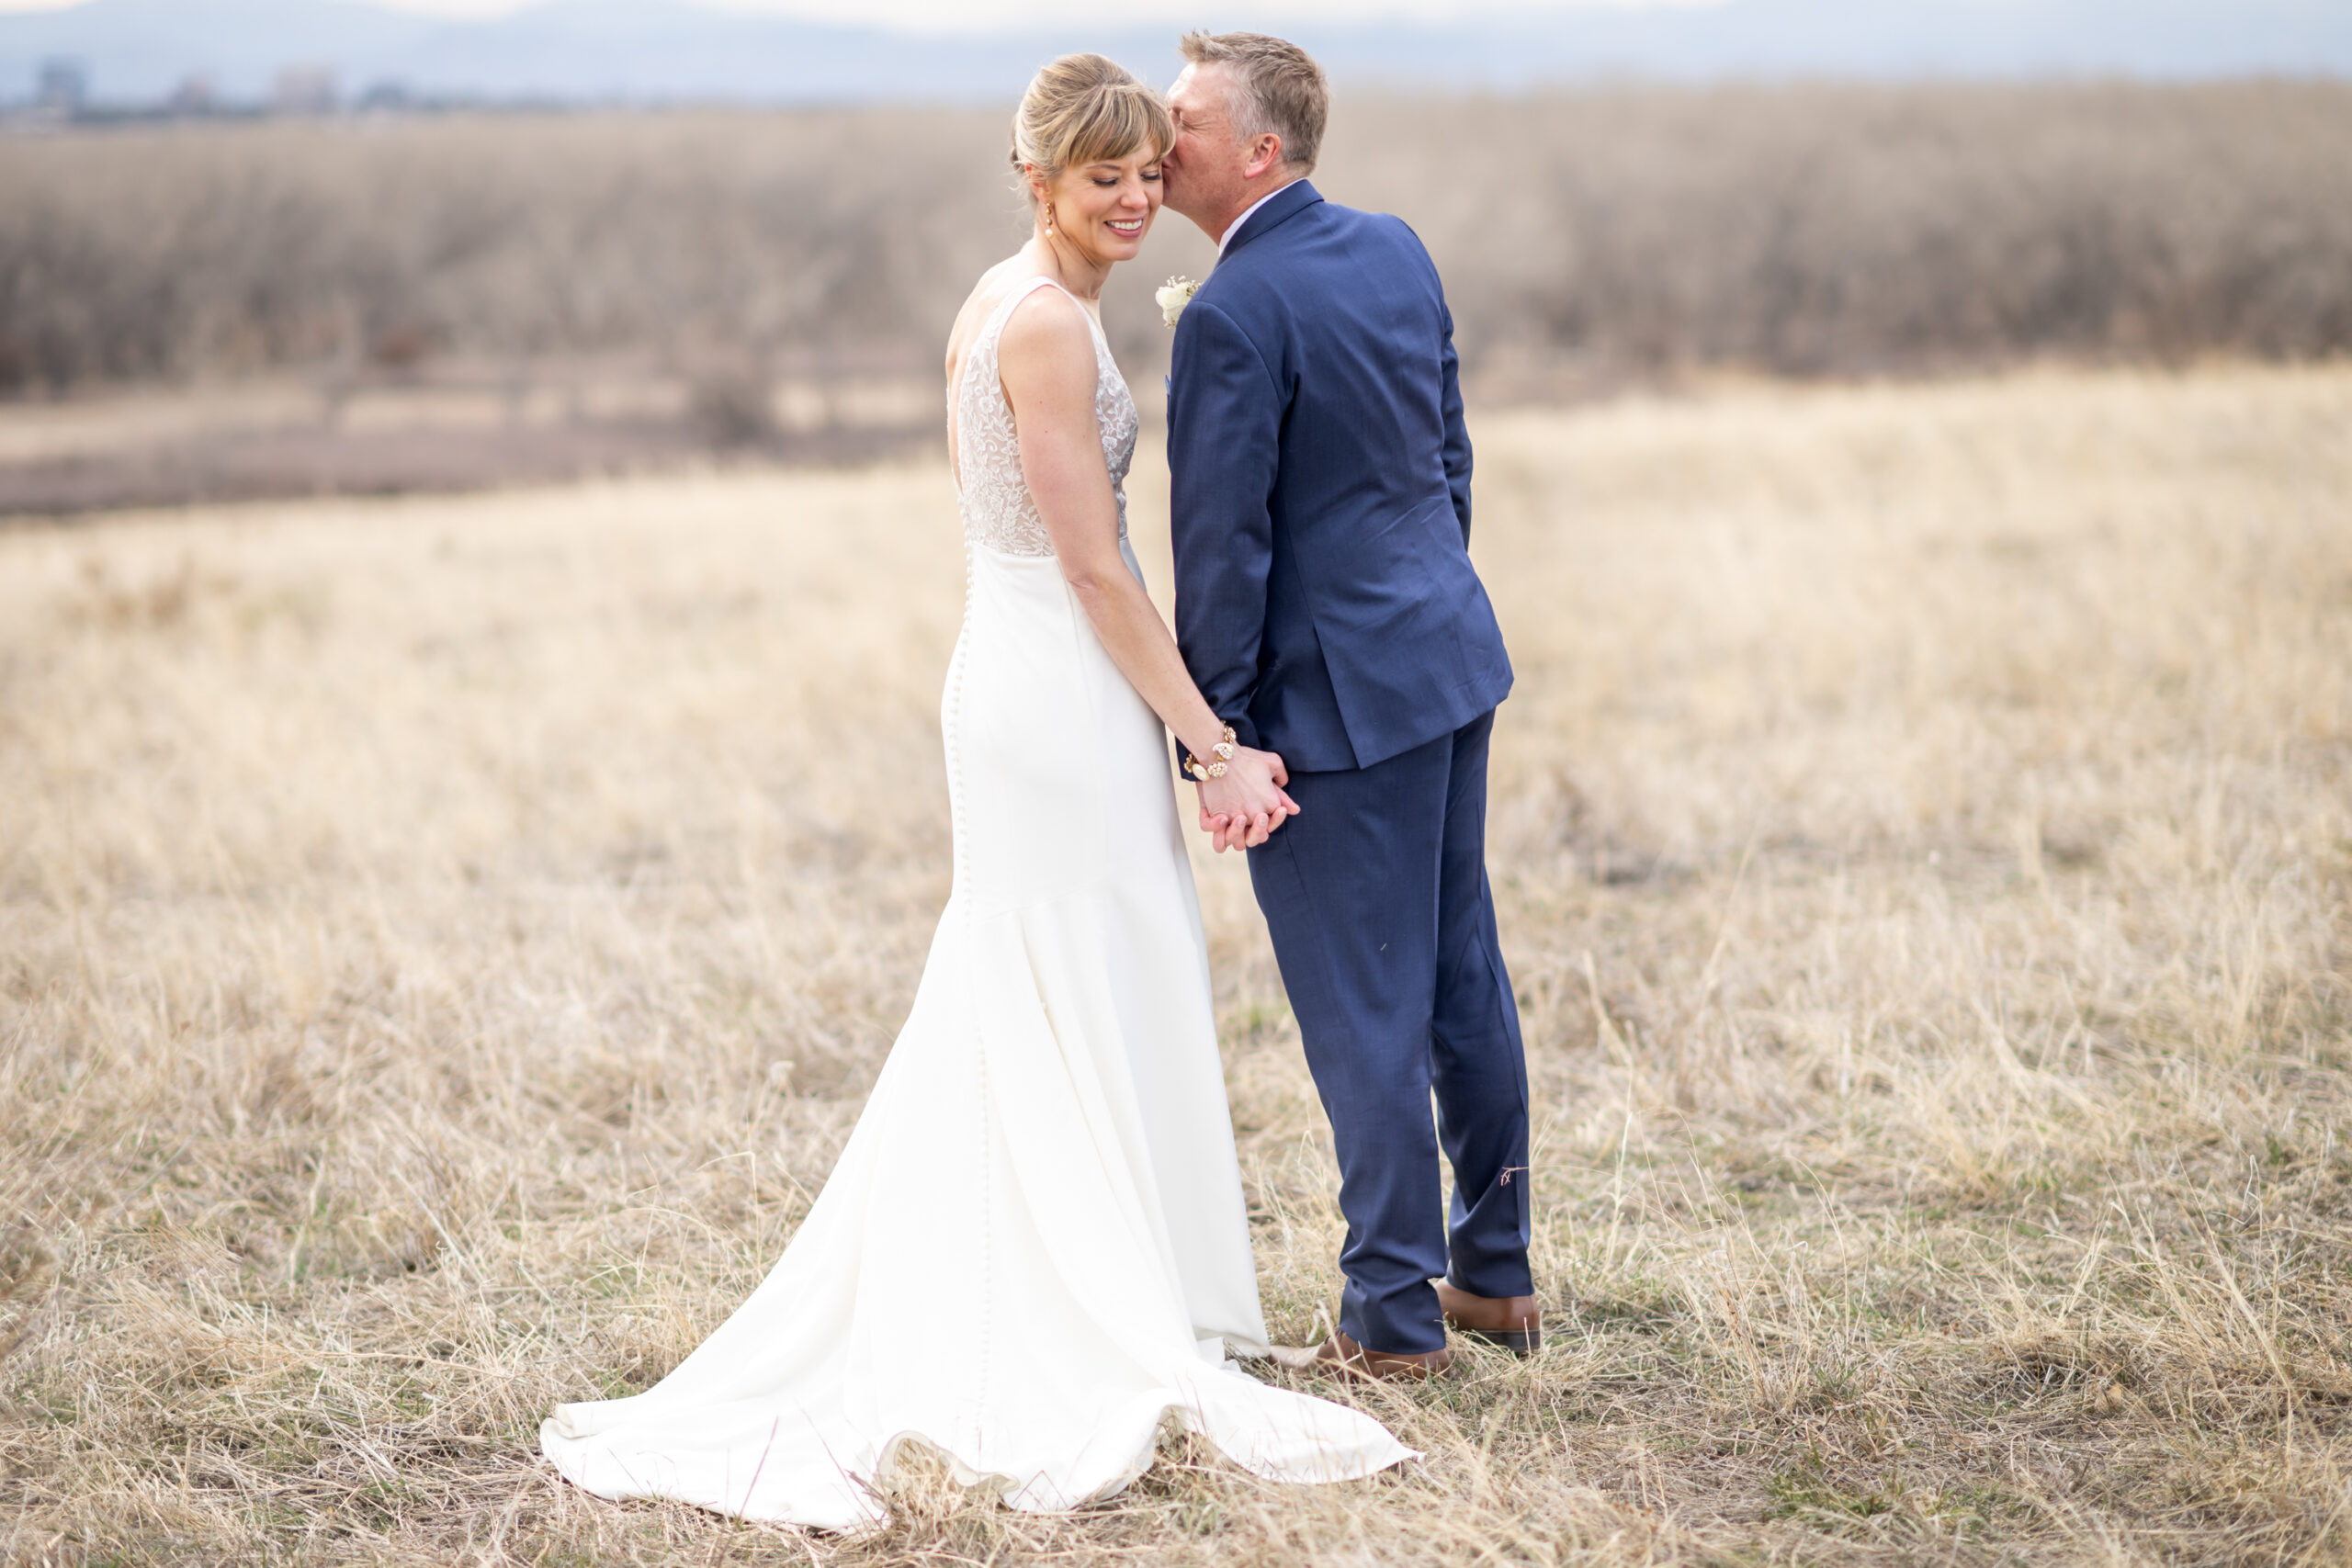 The bride and groom pose for couples photos at Cherry Creek State Park outside of Denver, Colorado.